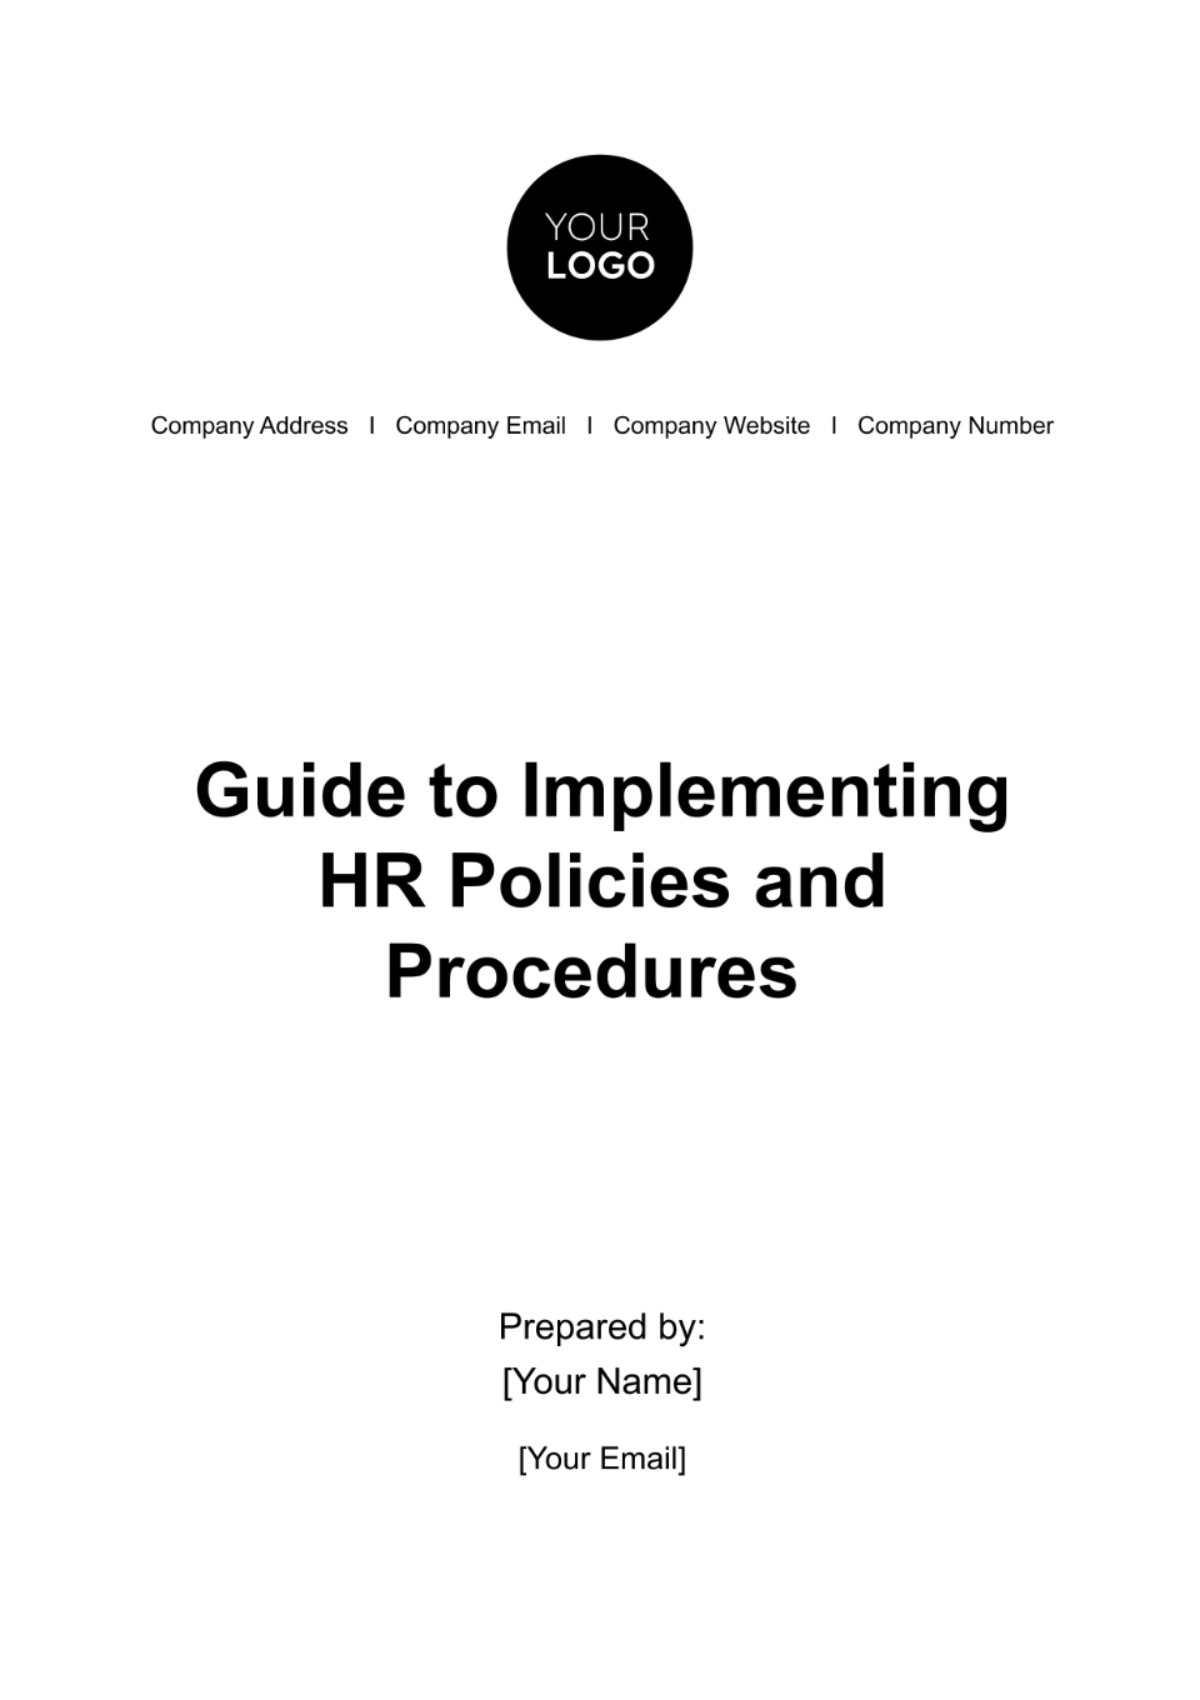 Guide to Implementing HR Policies and Procedures Template